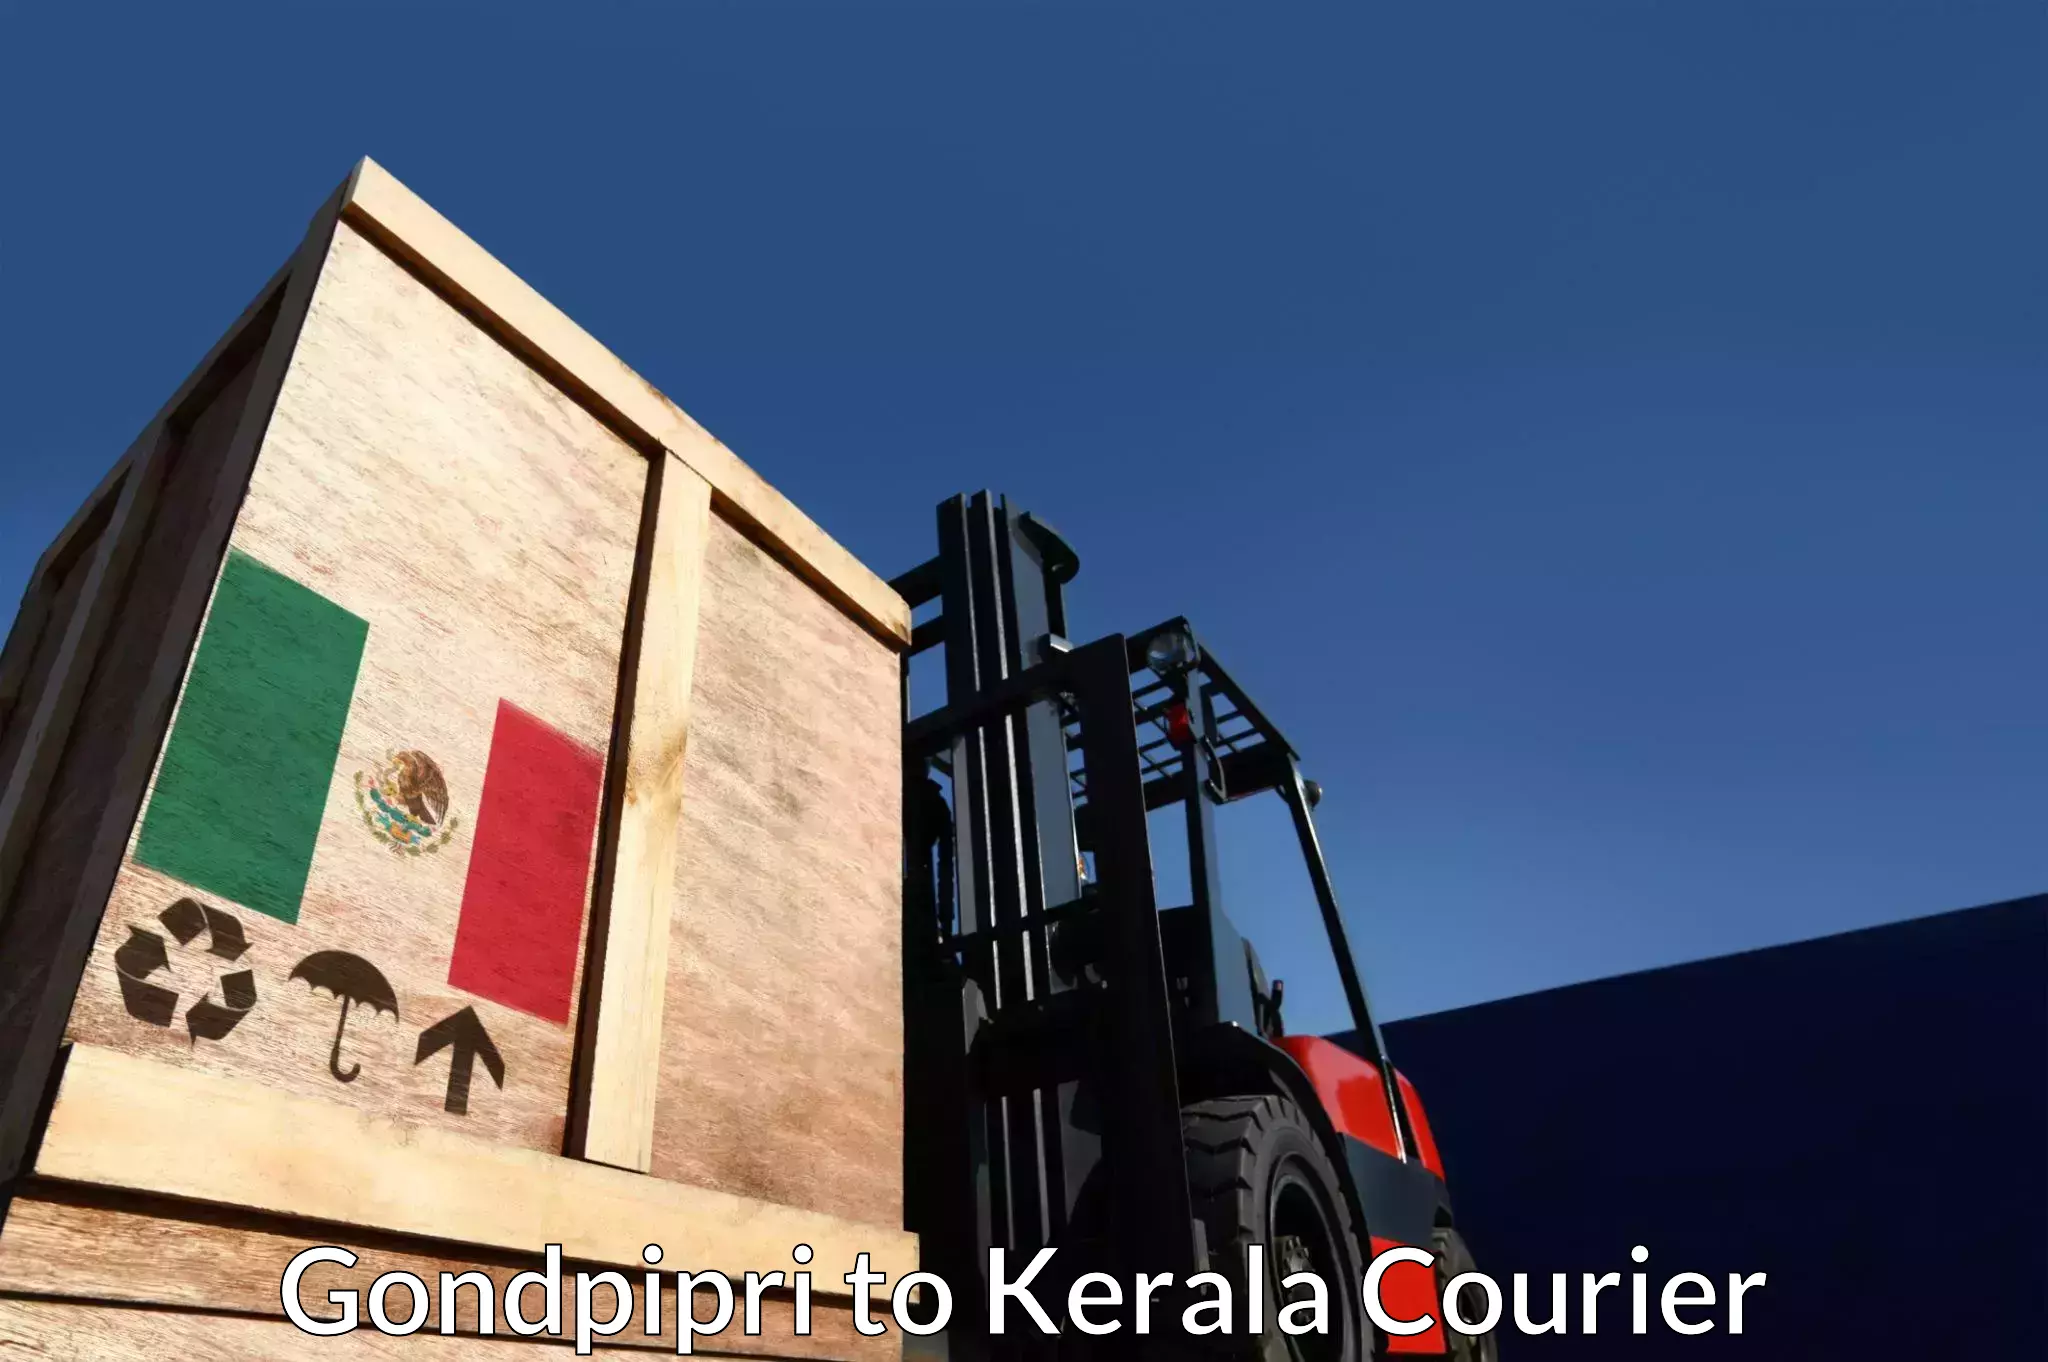 Automated shipping Gondpipri to Kannur